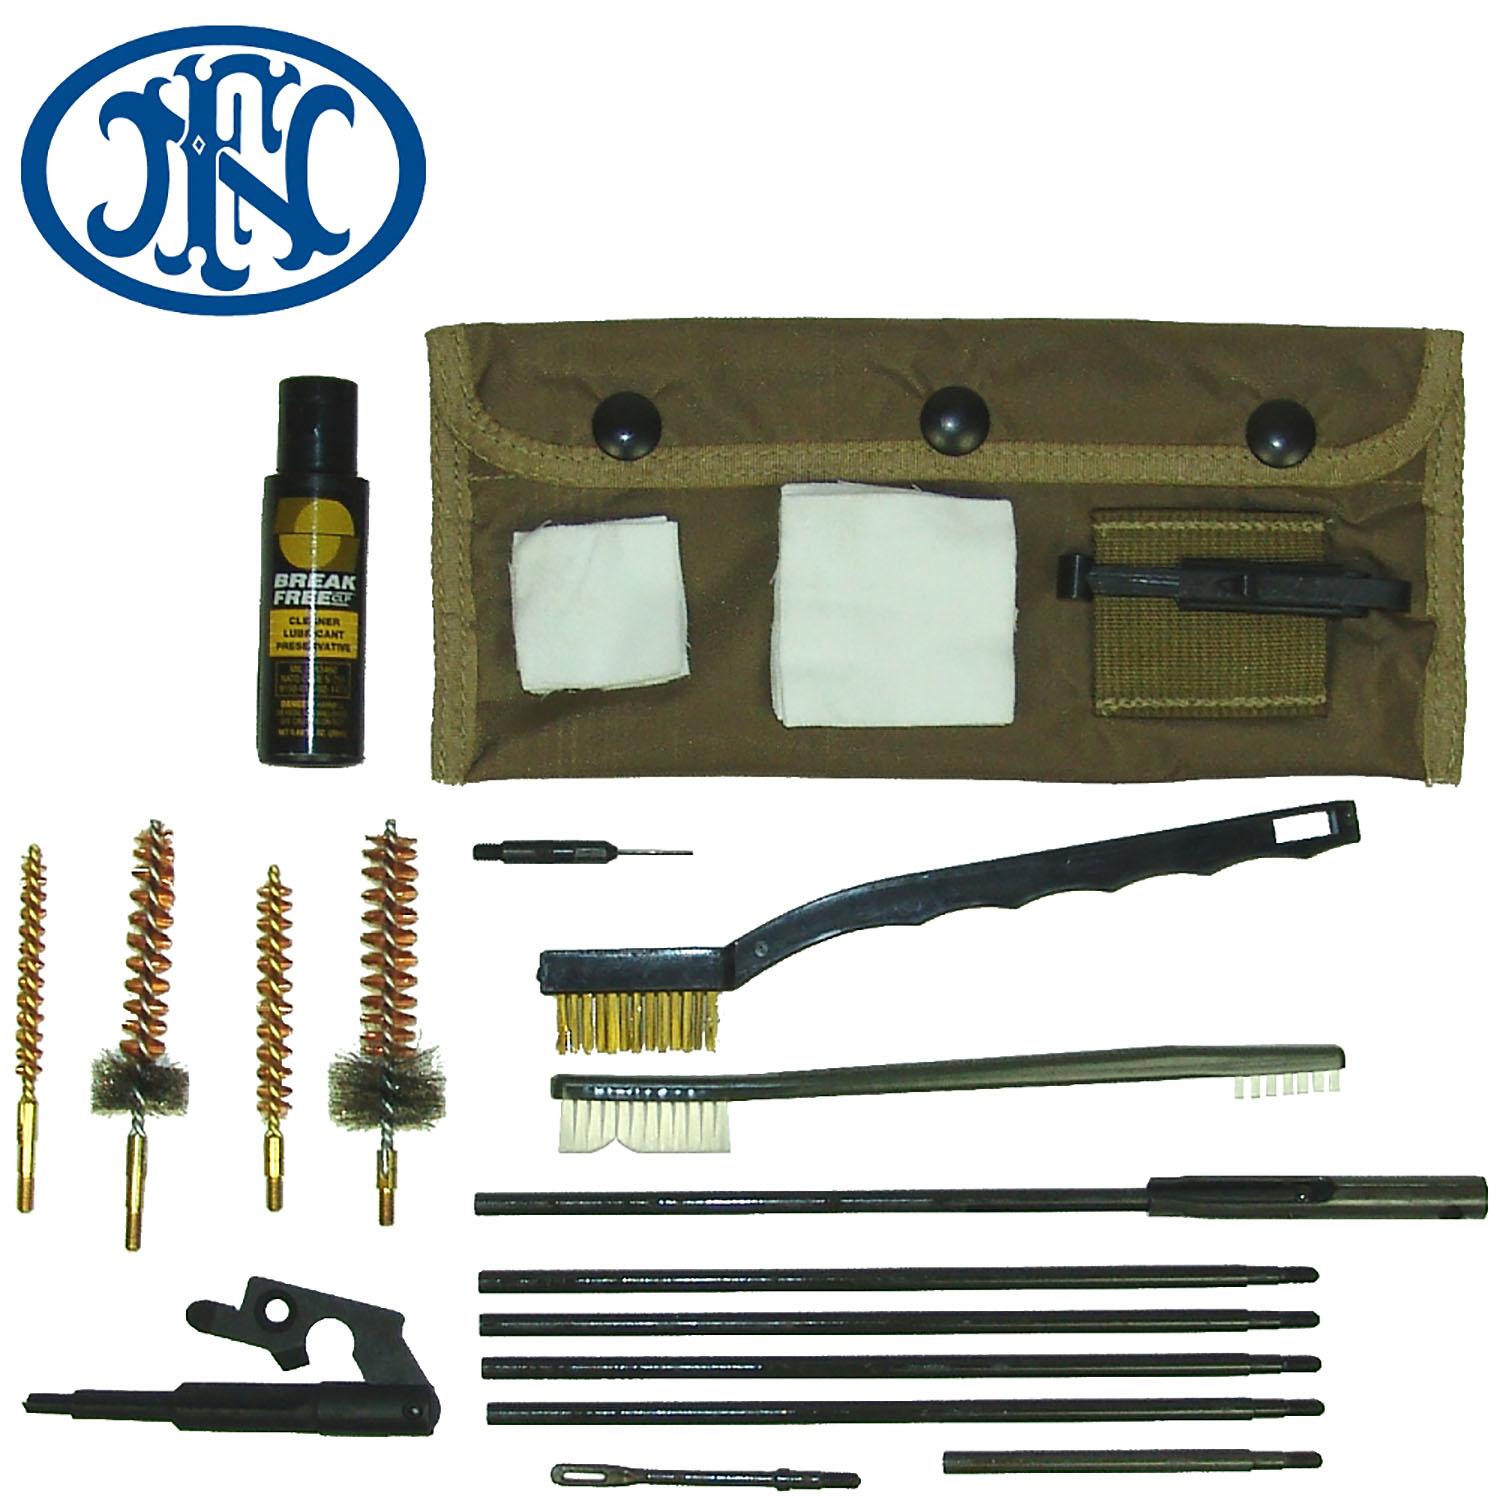 Fnh Scar Cleaning Kit Mgw